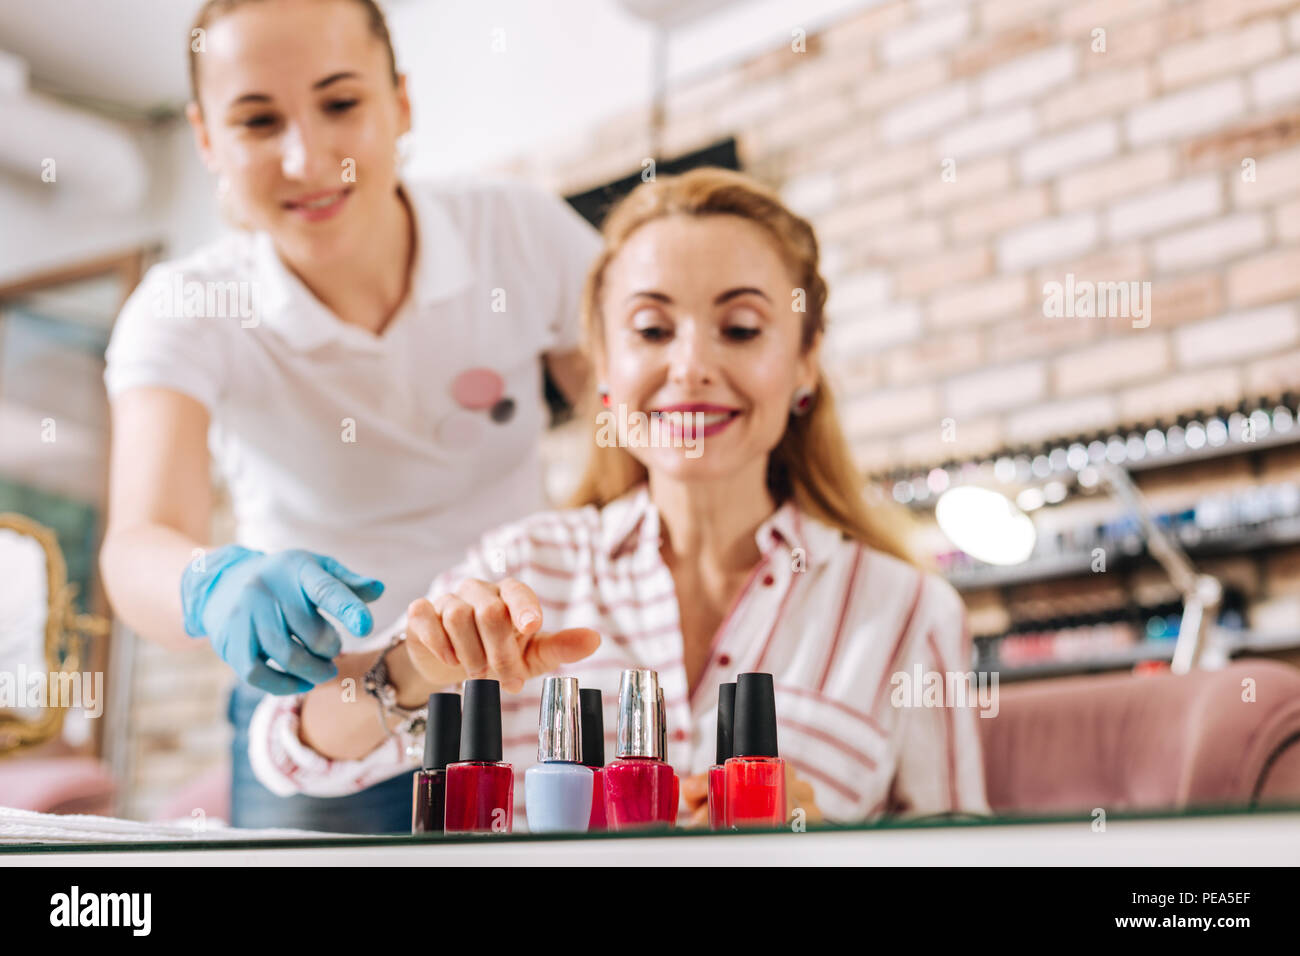 Positive mature woman stretching for nail polish Stock Photo